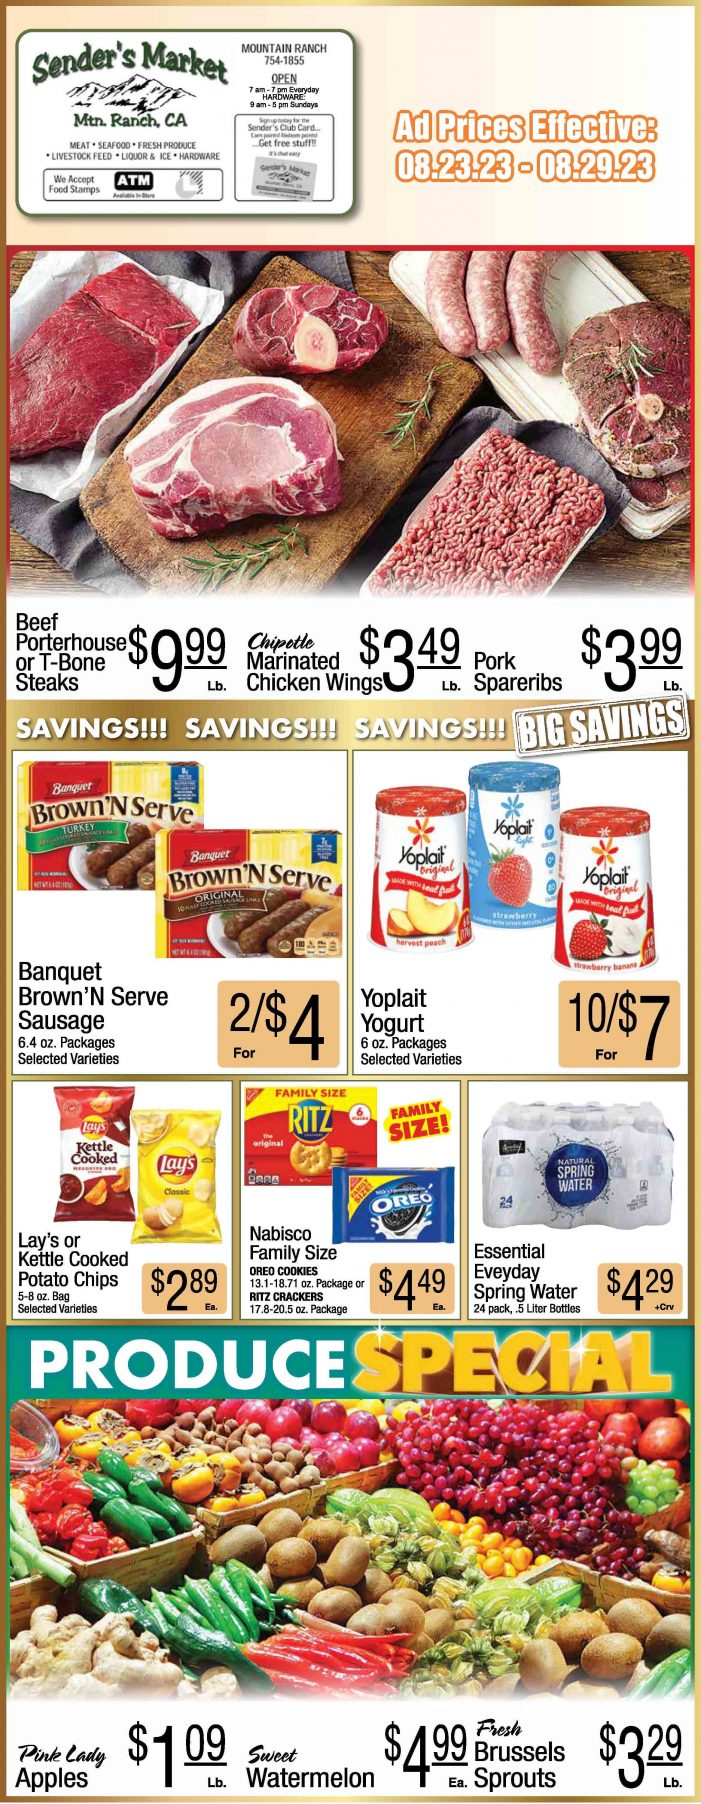 Sender’s Market Weekly Ad & Grocery Specials Through September 5th! Shop Local & Save!!